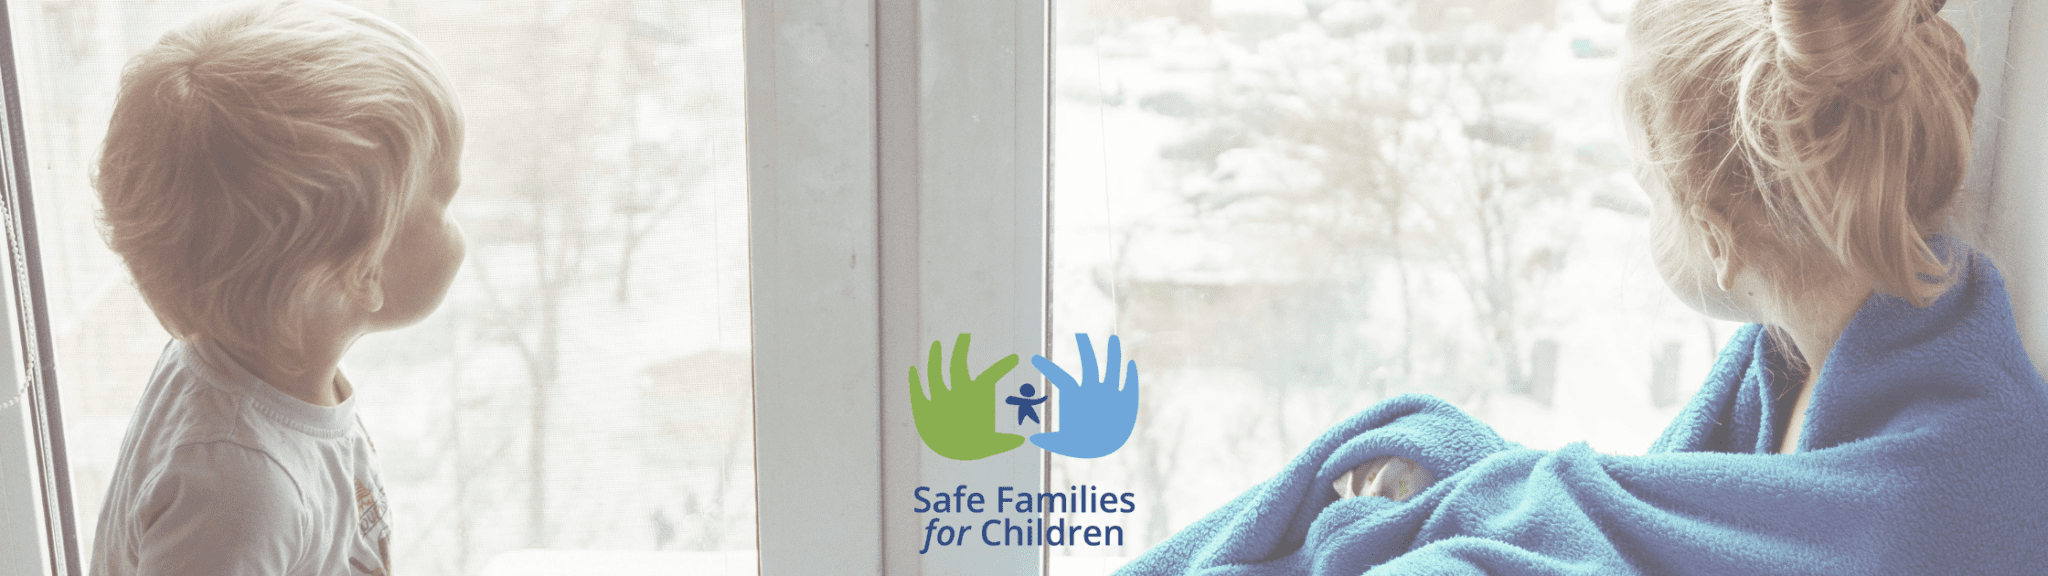 Image of children looking out a window with Safe Families Logo